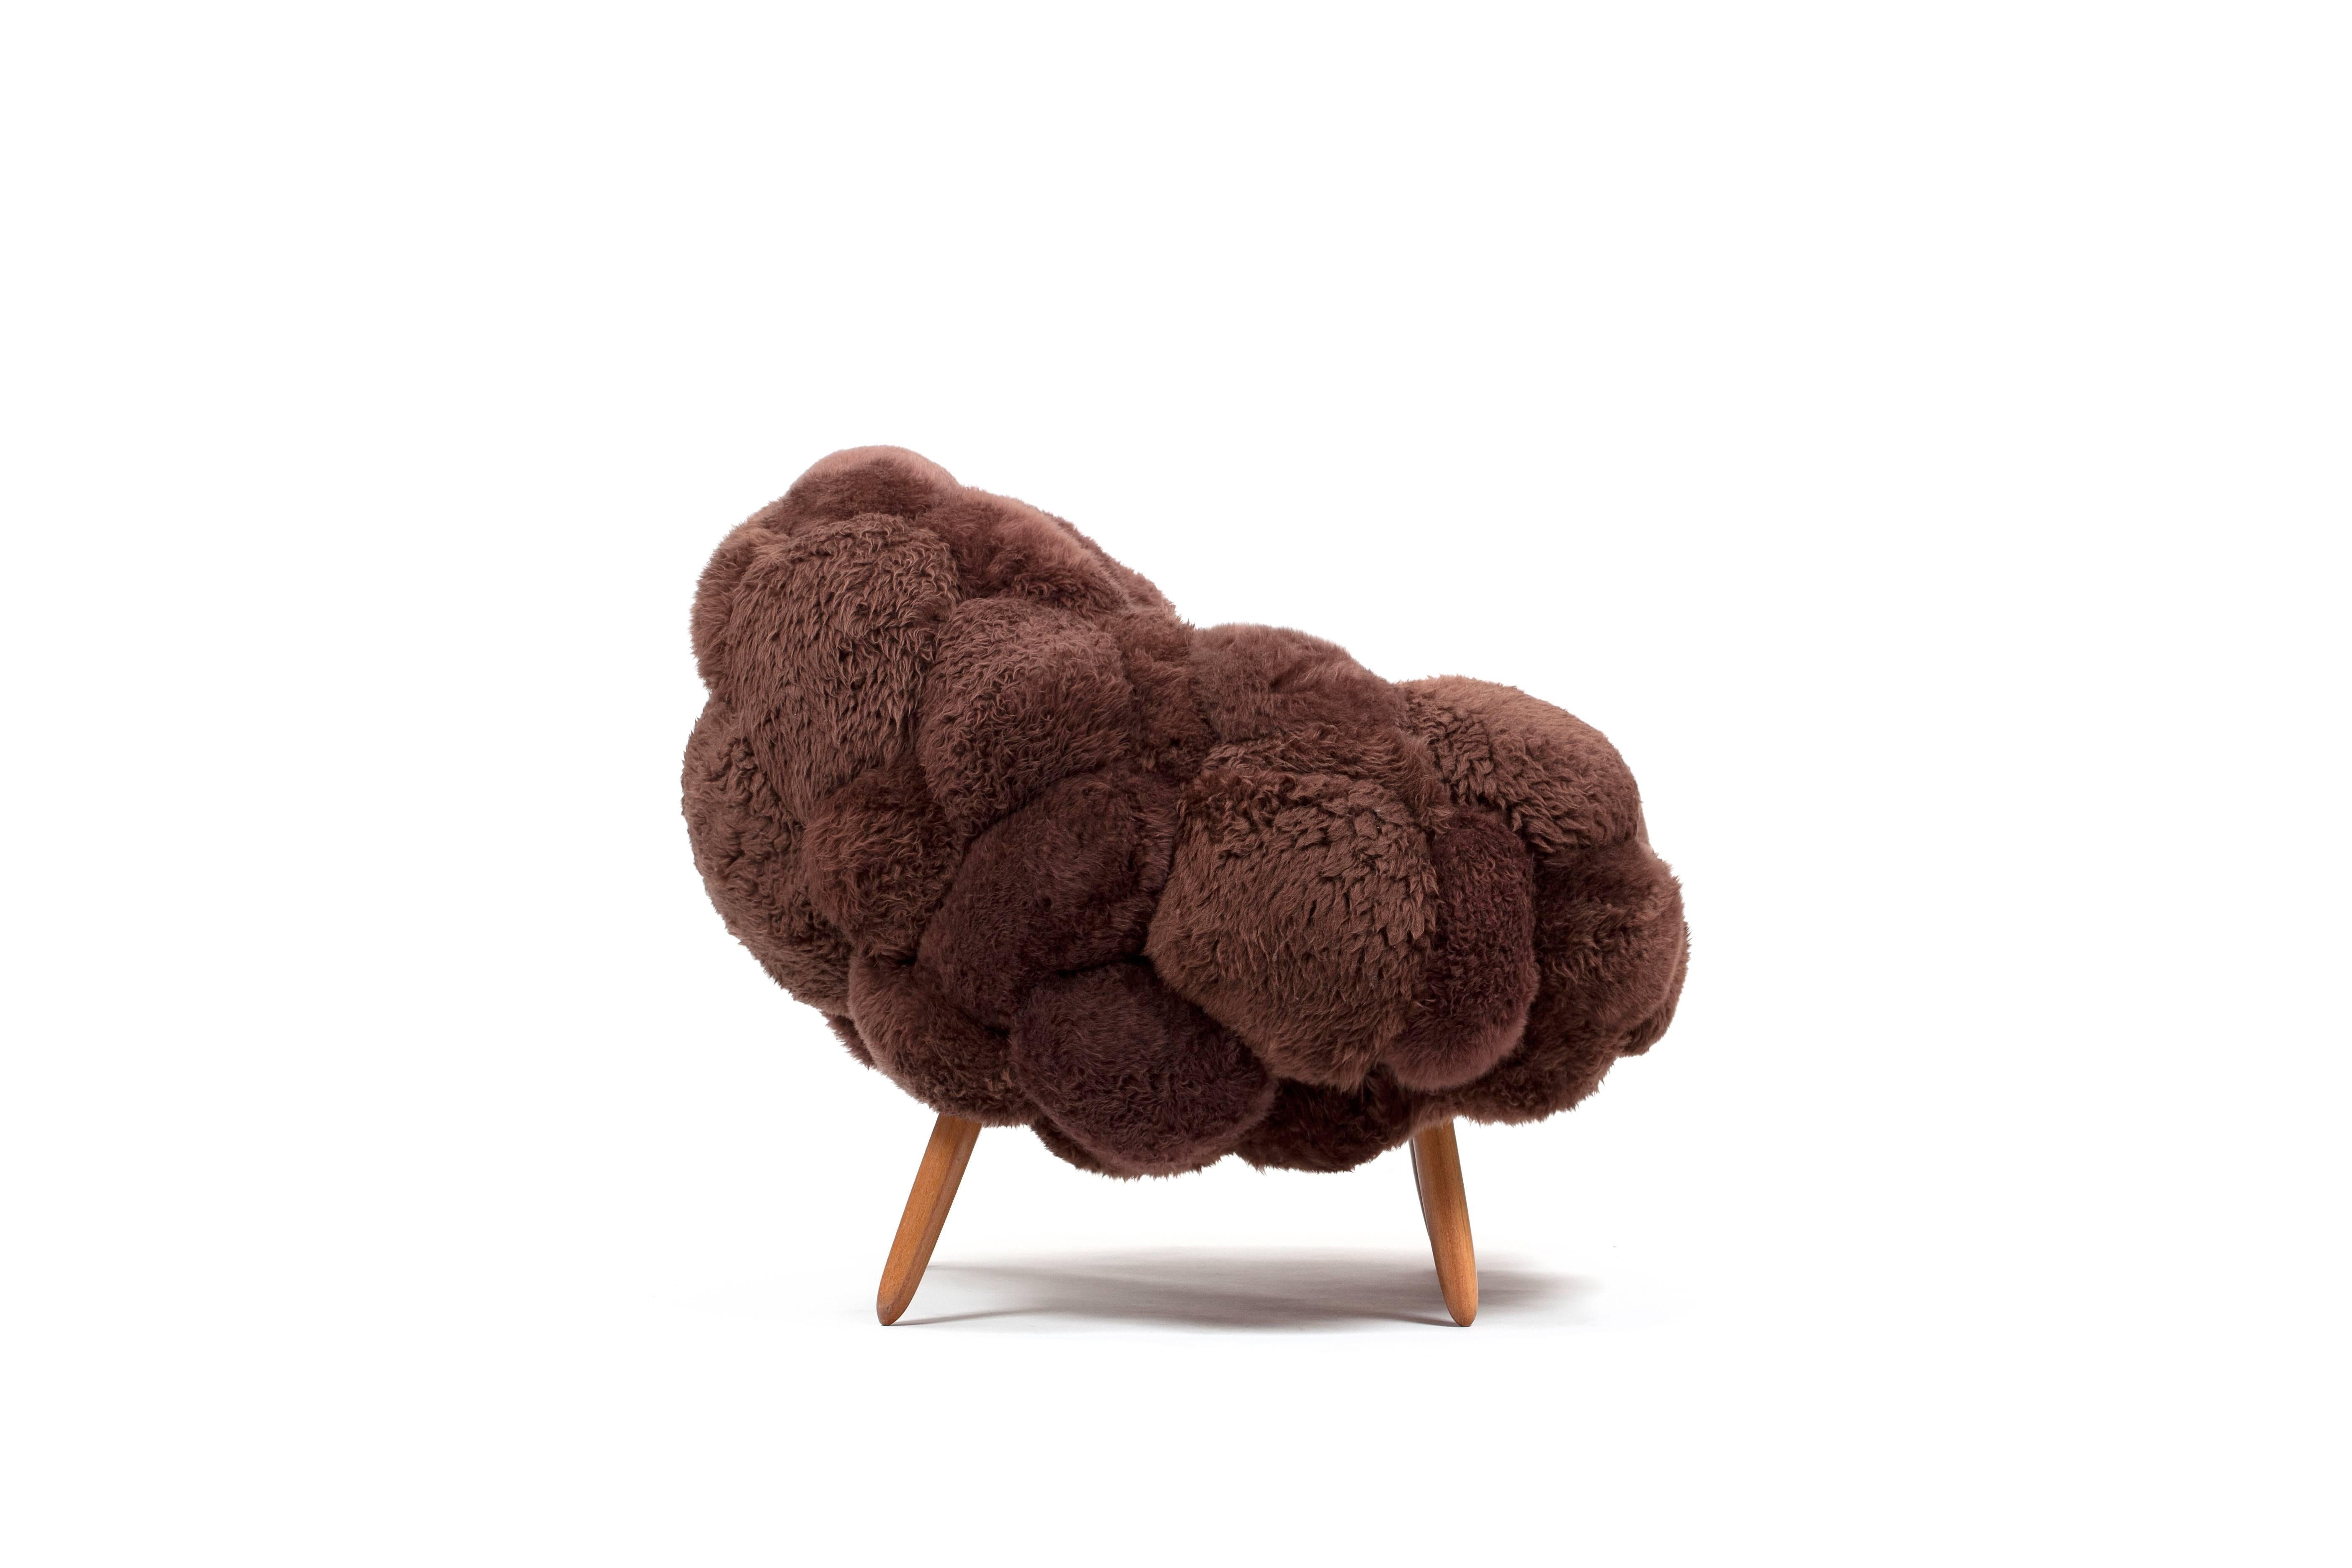 Bolotas Armchair (Café), 2015
Sheep's wool and Ipê wood
41.25 x 43.25 x 33.5 inches
105 x 110 x 85 cm

The Campana Brothers, Fernando (b. 1961) and Humberto (b. 1953) were born in Brotas, a city outside of São Paulo. Together, in 1983, they founded